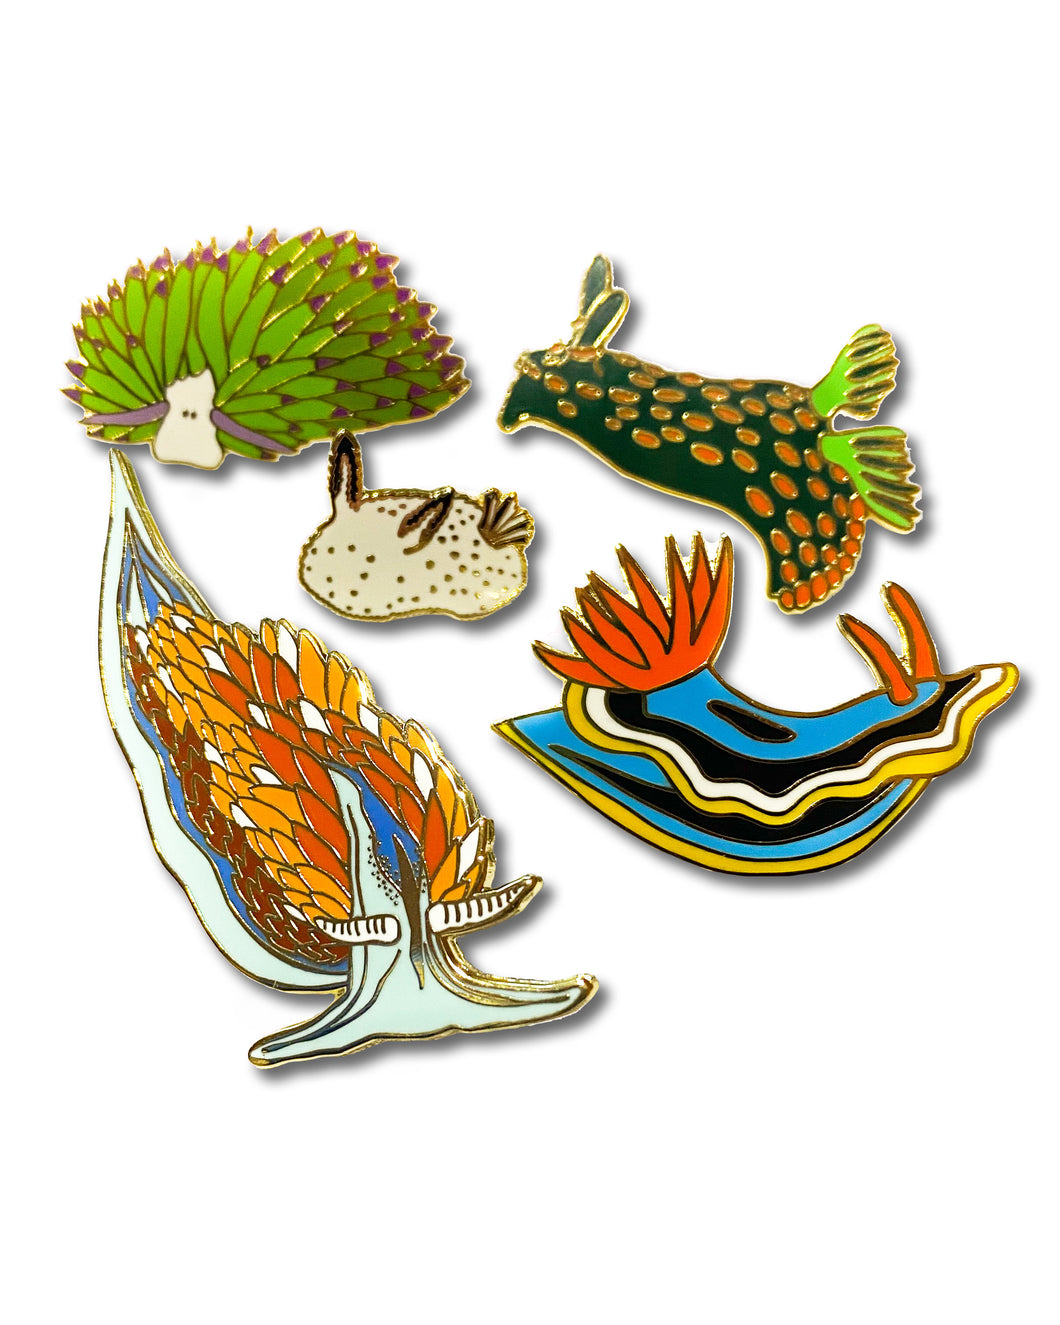 Wildlife Conservation Pin Package - All 5 Species!